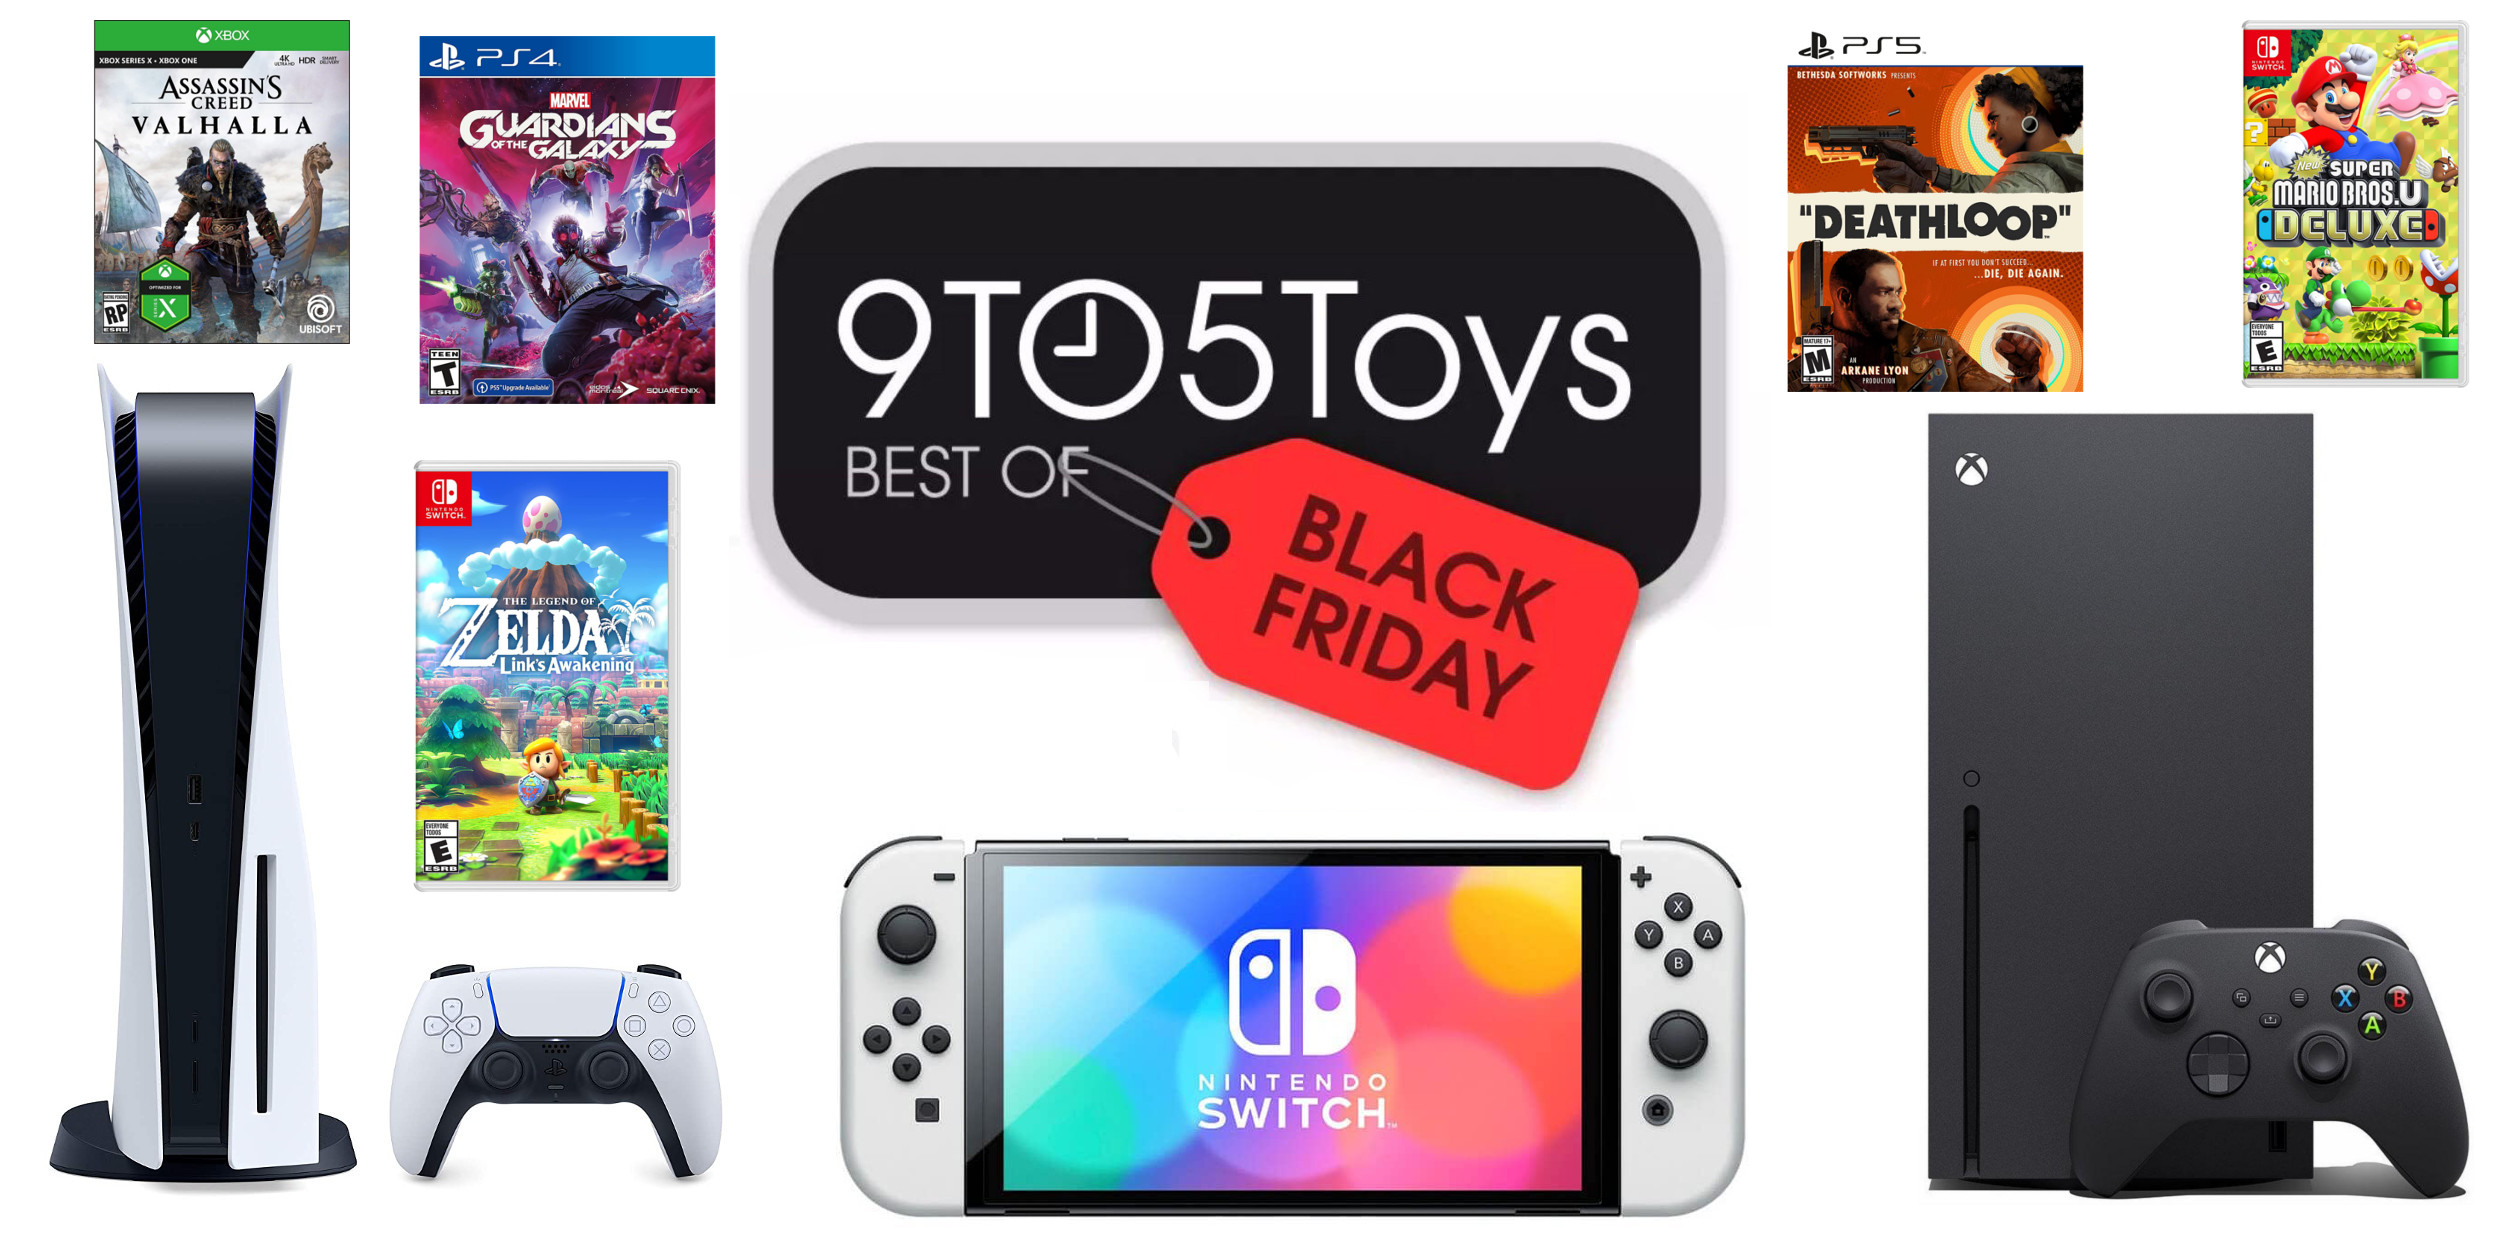 Nintendo Switch Black Friday deals: Consoles & top games on sale